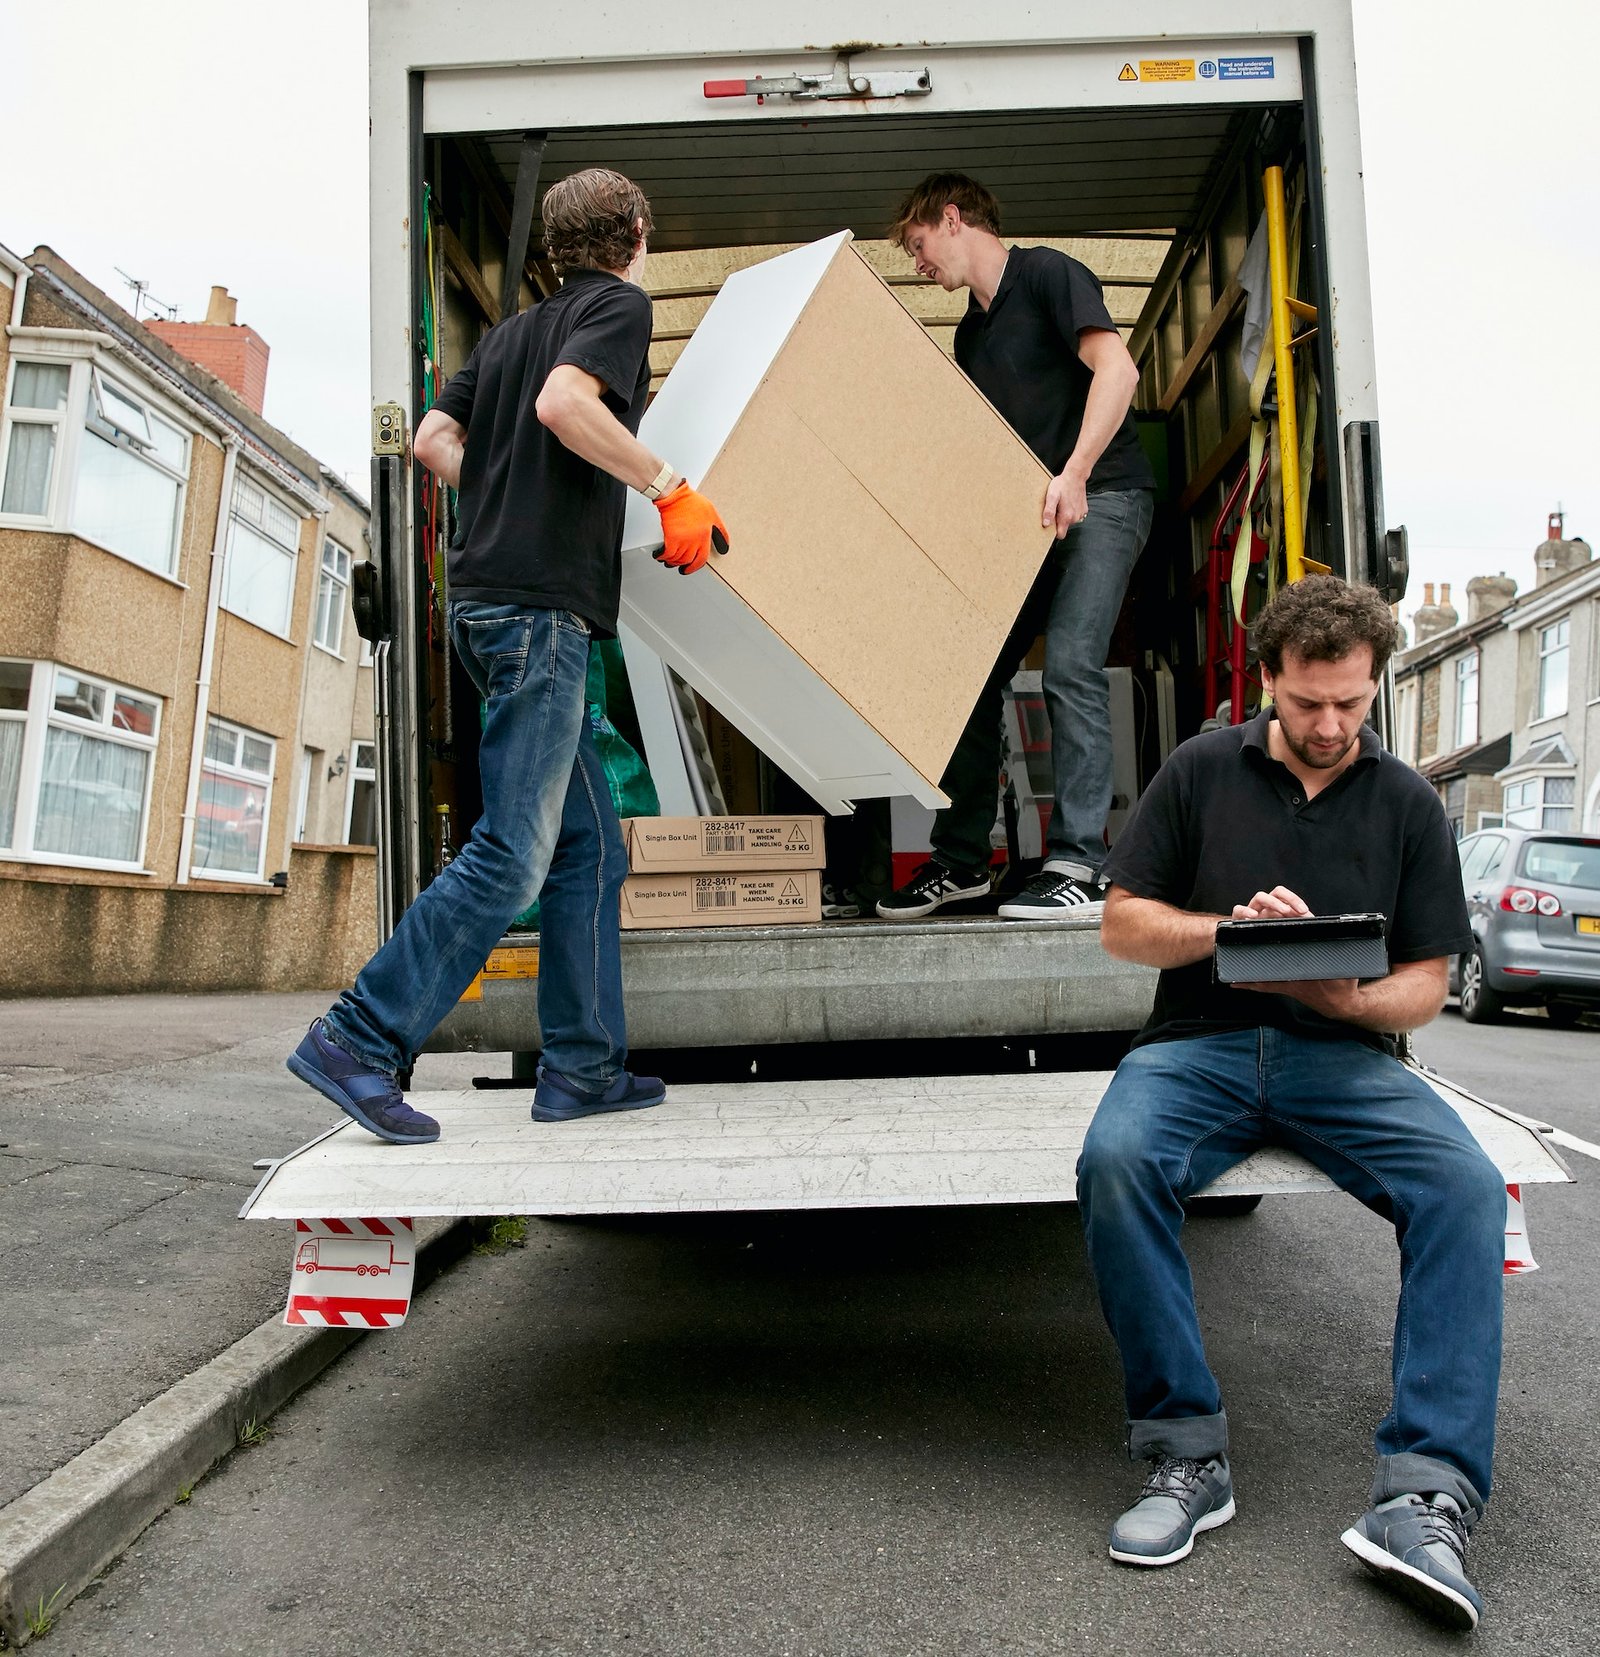 Removals business A removals company two men lifting furniture and one seated using a digital